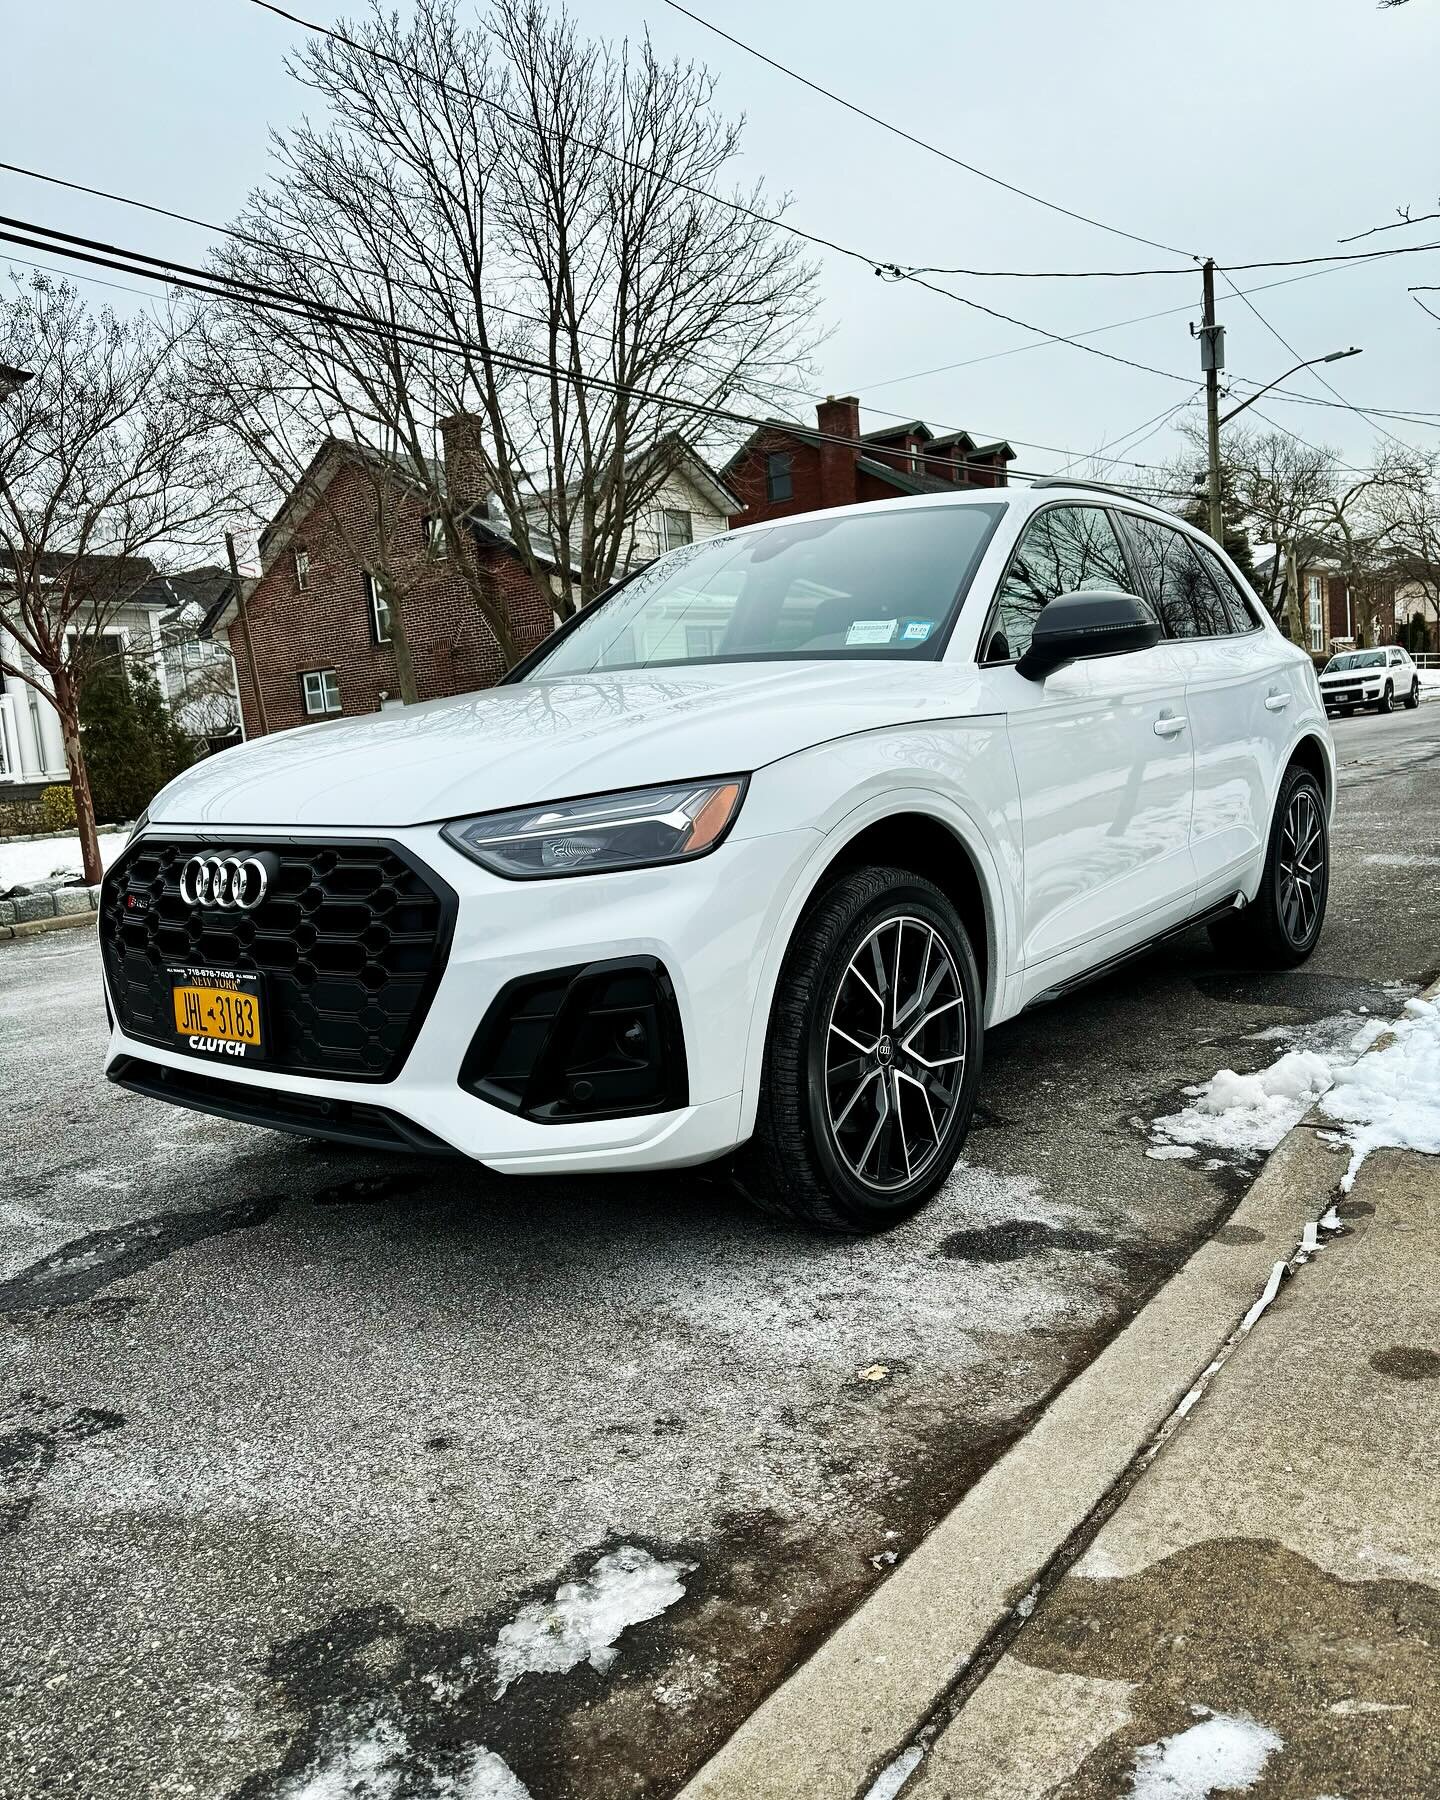 The calm before the storm&hellip;Check out the beautiful 2024 AUDI SQ5 premium plus package delivered today

CALL/DM us today!

718-676-7406

#autoleasing #auto #leasing #newyork #clutchautogroup #nissan #jeep #dodge #ram #bmw #benz #lexus #hyundai #